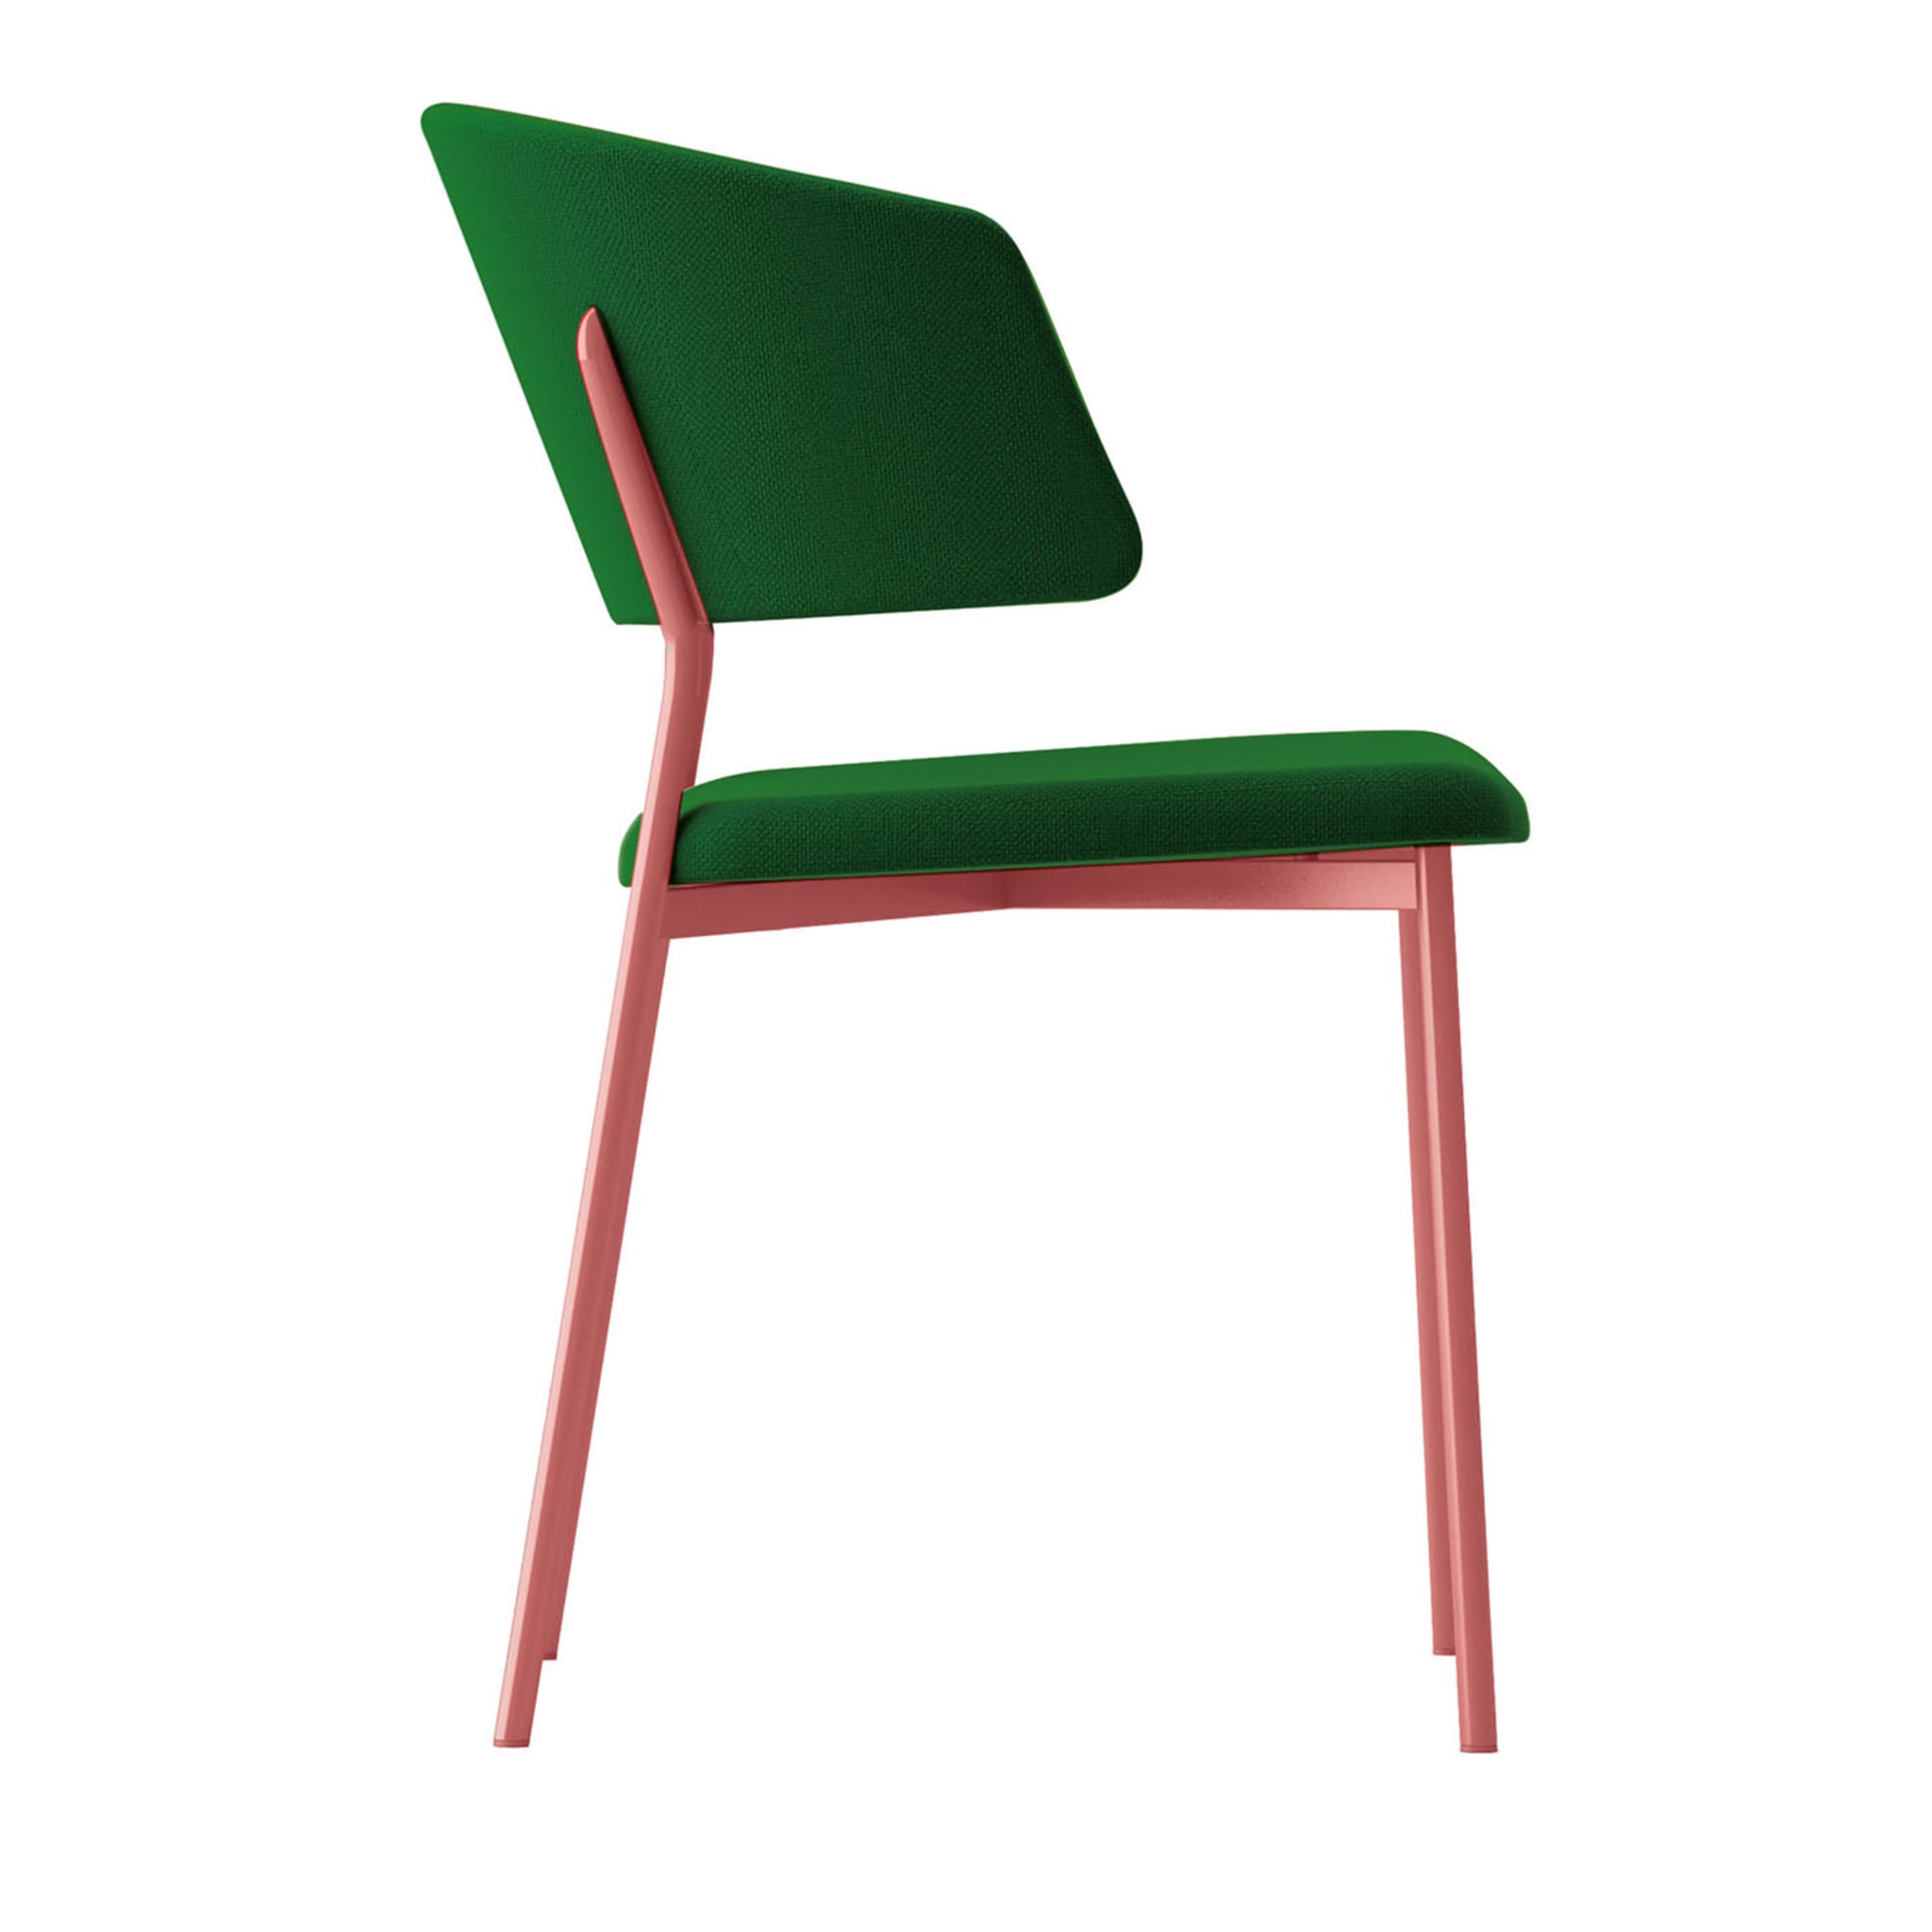 Wrap Steel Green & Pink Chair by Copiosa Lab - Main view